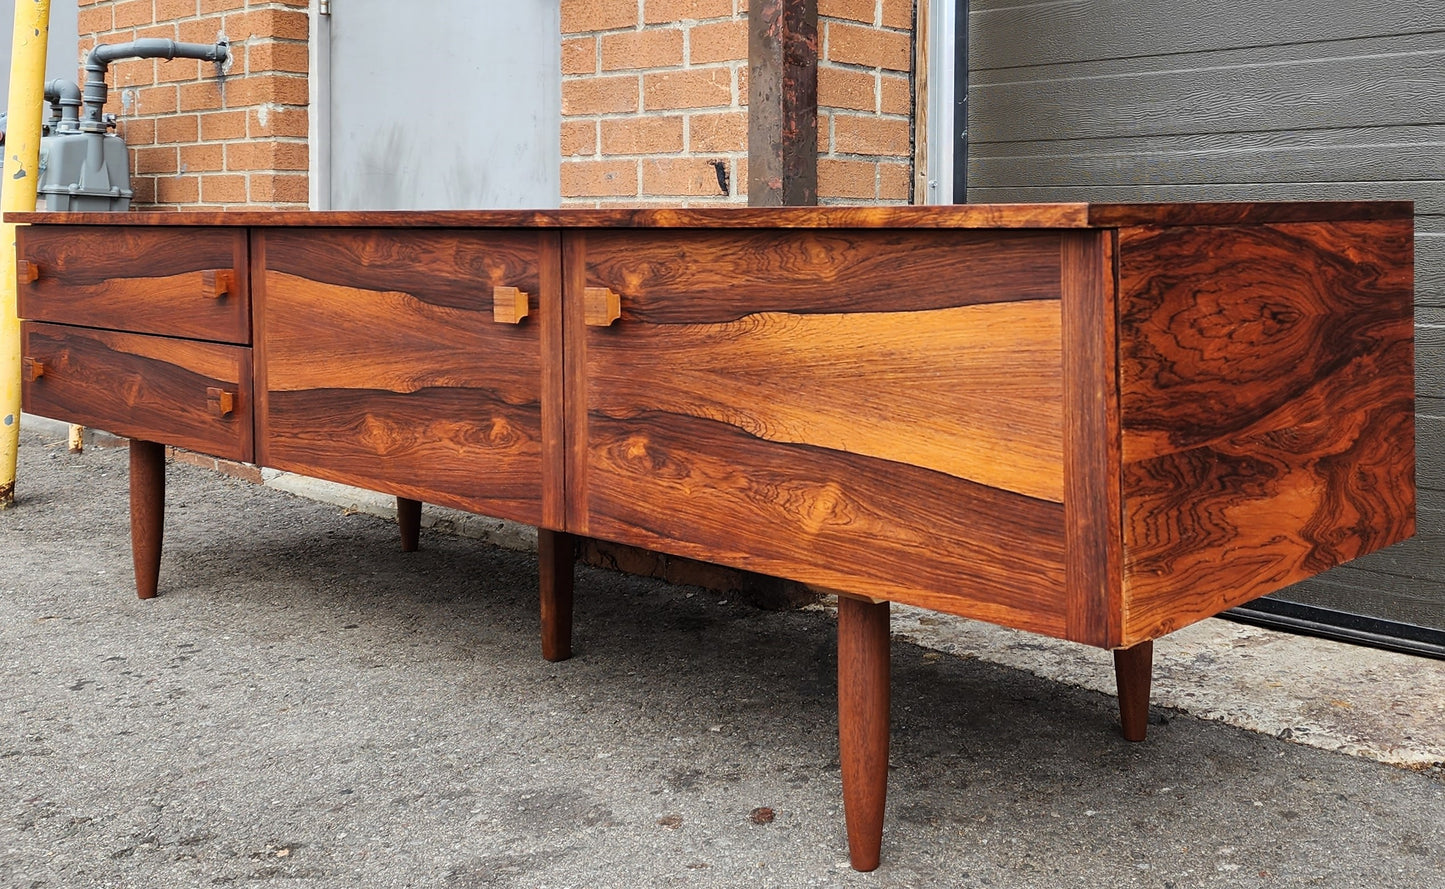 REFINISHED Danish Mid Century Modern Rosewood Console 86"wide & low